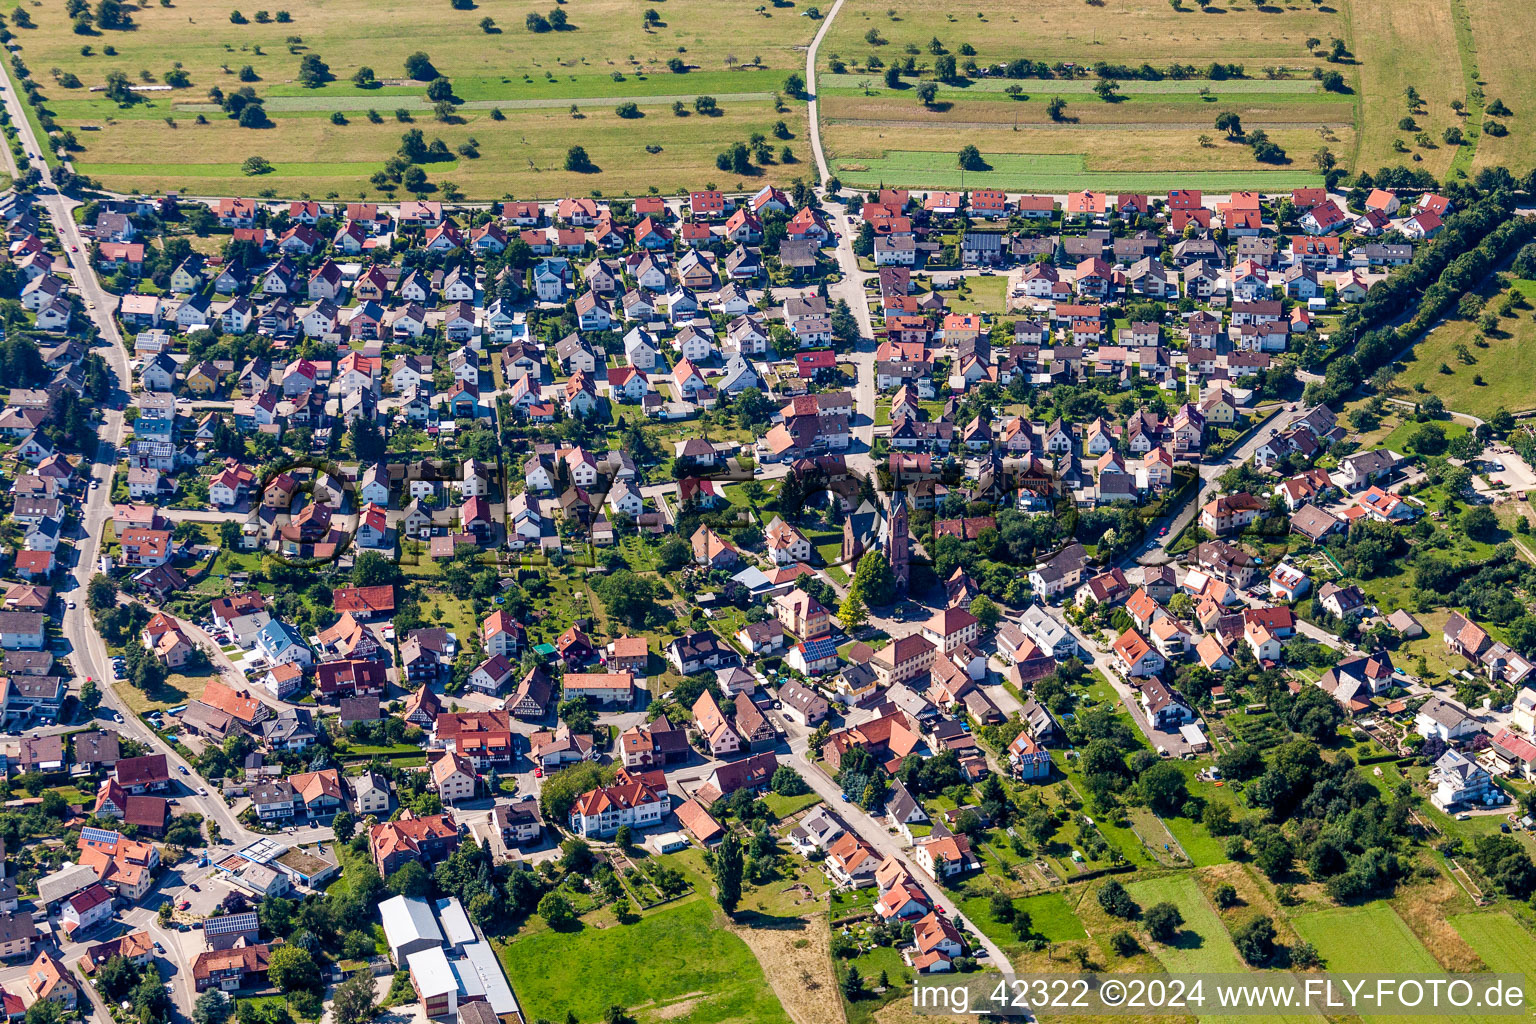 Village - view on the edge of agricultural fields and farmland in Schoellbronn in the state Baden-Wurttemberg, Germany